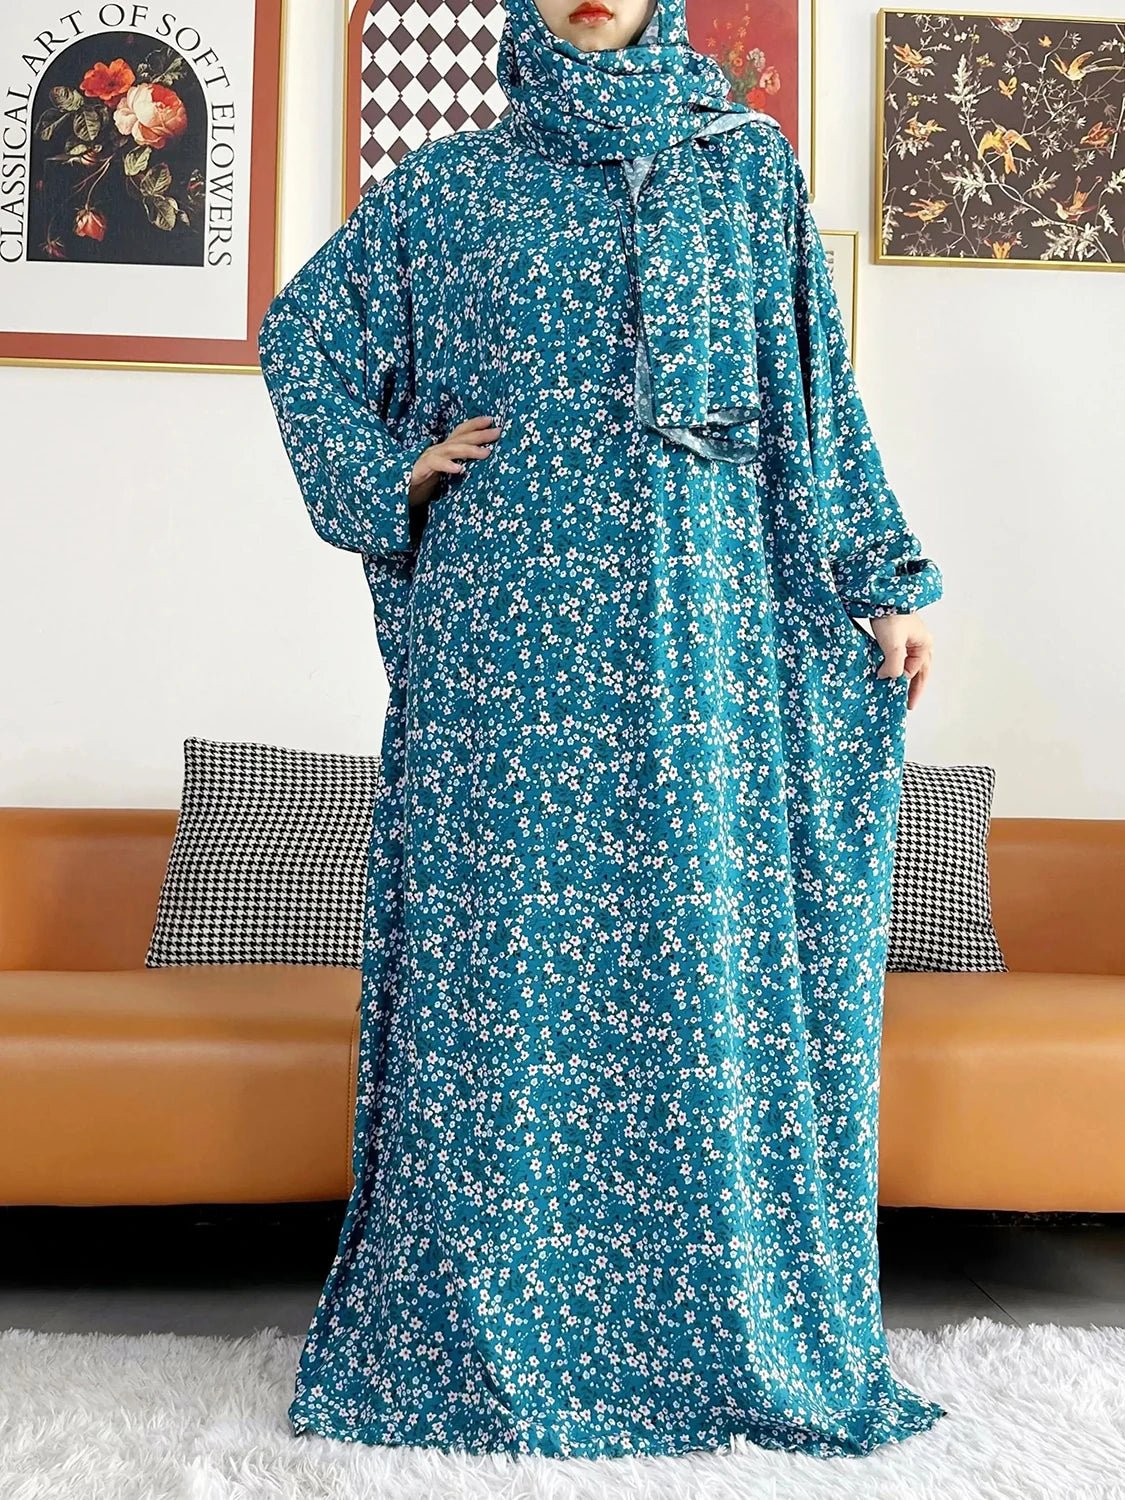 African Muslim Women Hooded Cotton Prayer Garment Kaftan With Hijab Floral Prints - Flexi Africa - Flexi Africa offers Free Delivery Worldwide - Vibrant African traditional clothing showcasing bold prints and intricate designs